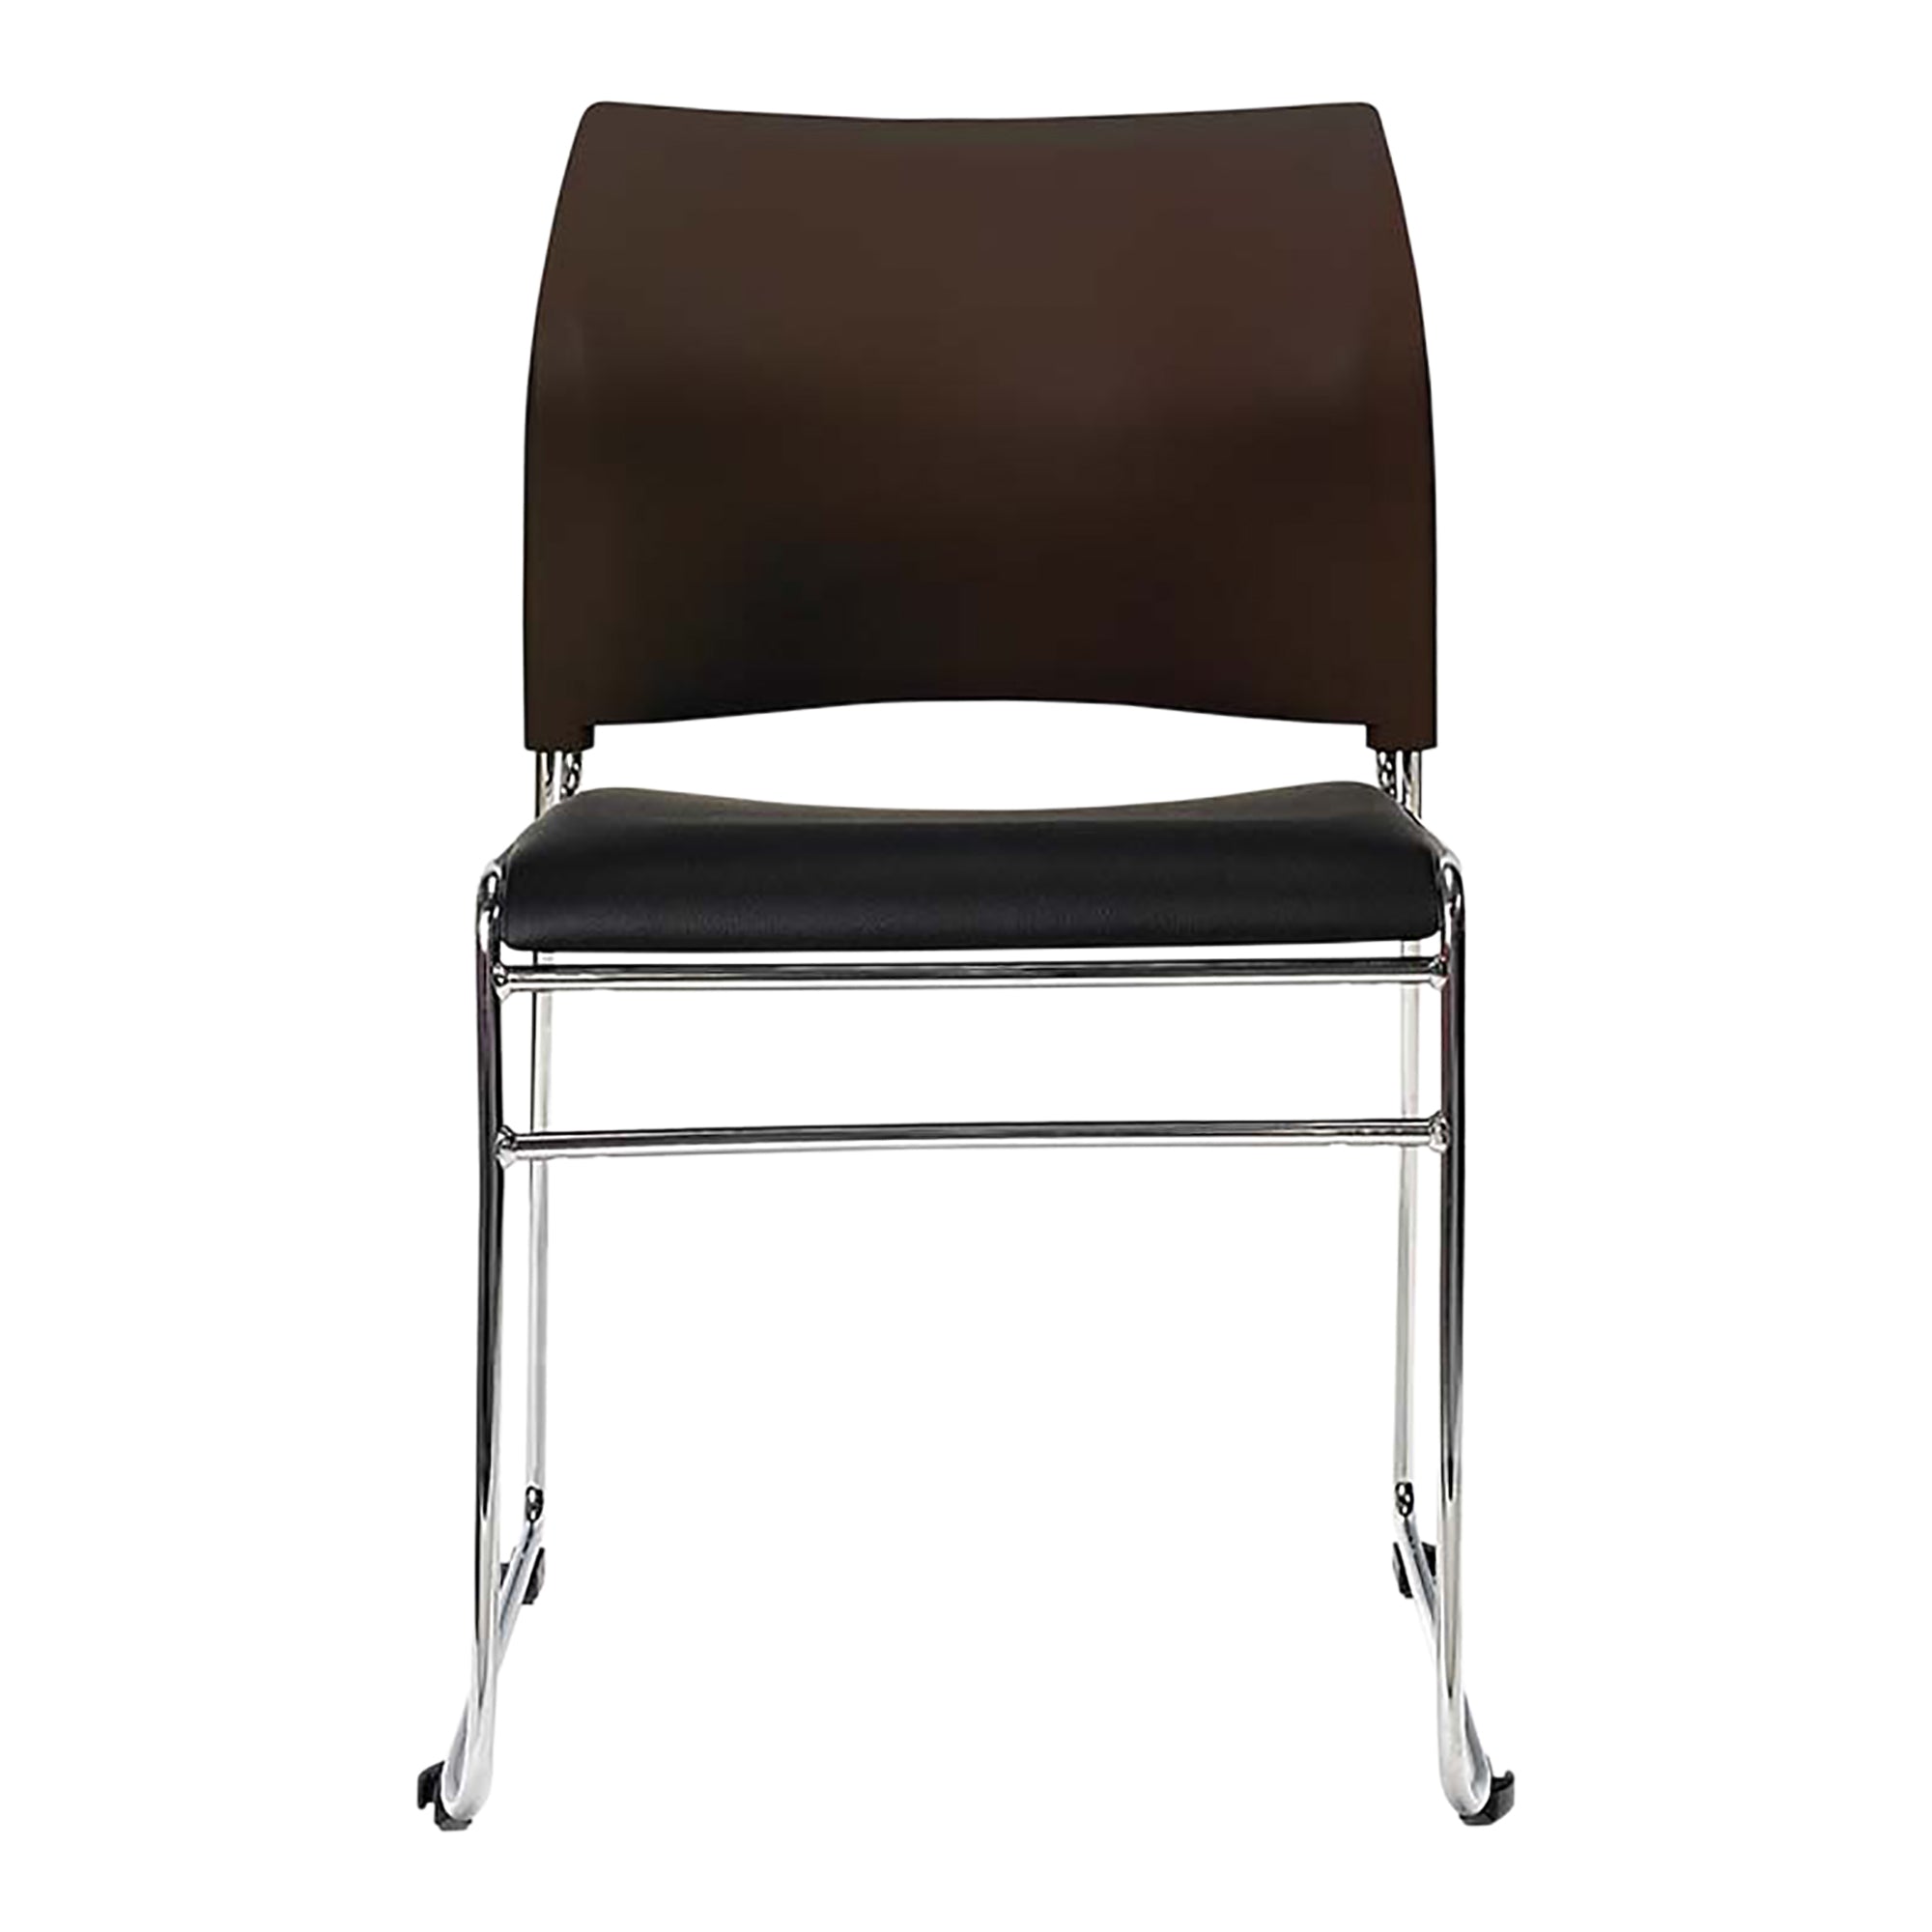 Maxim Chair with chrome sled base and black seat and back